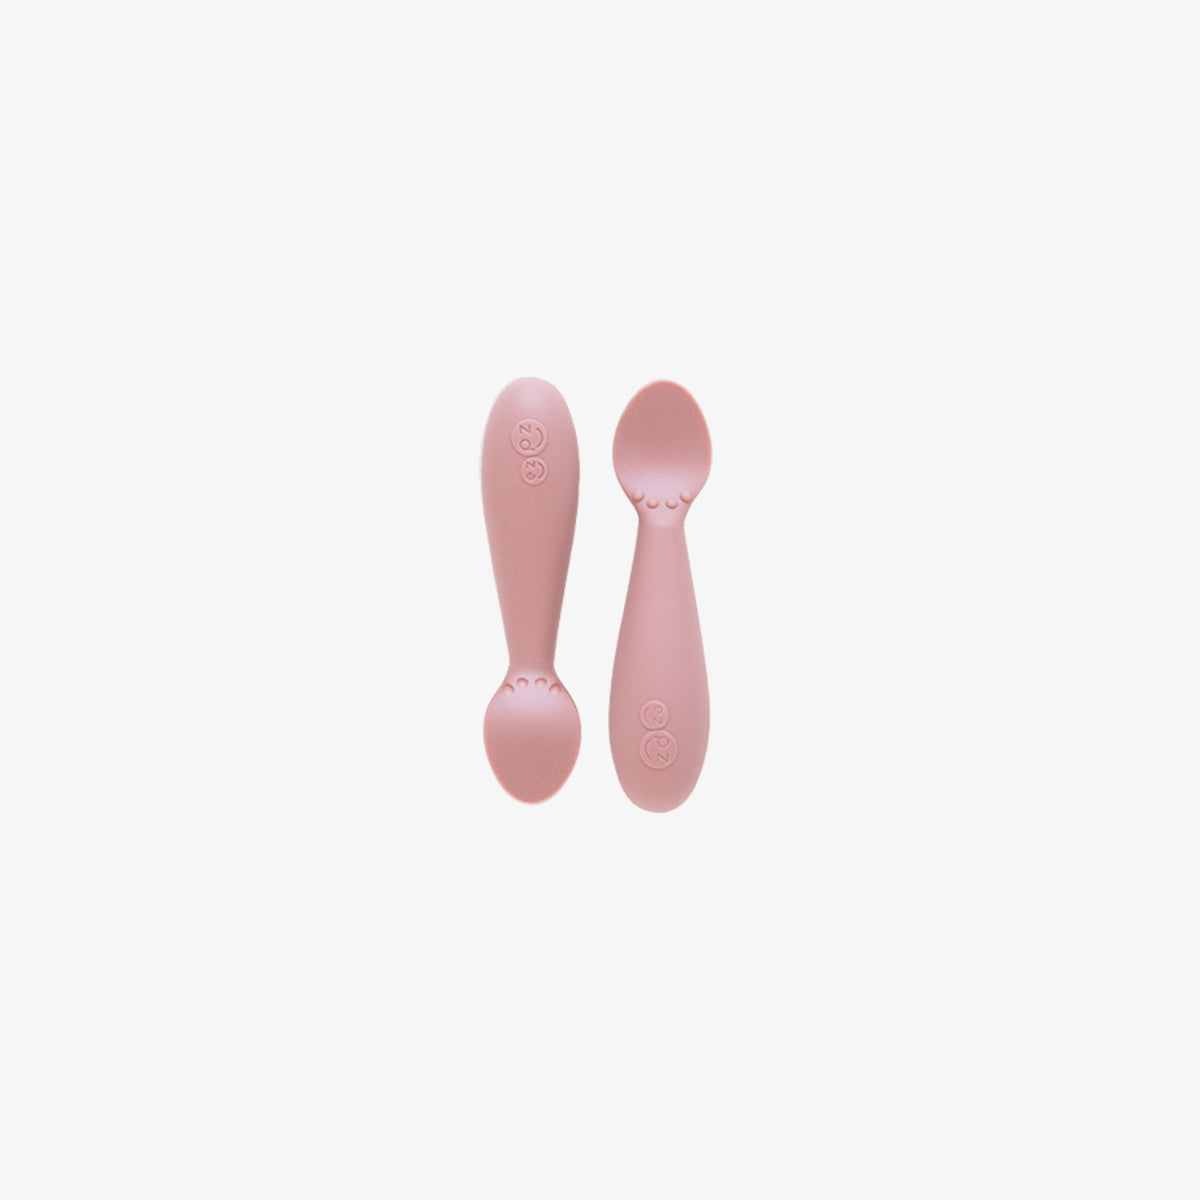 The Tiny Spoon in Blush by ezpz / Small, Sensory Silicone Spoon for Babies